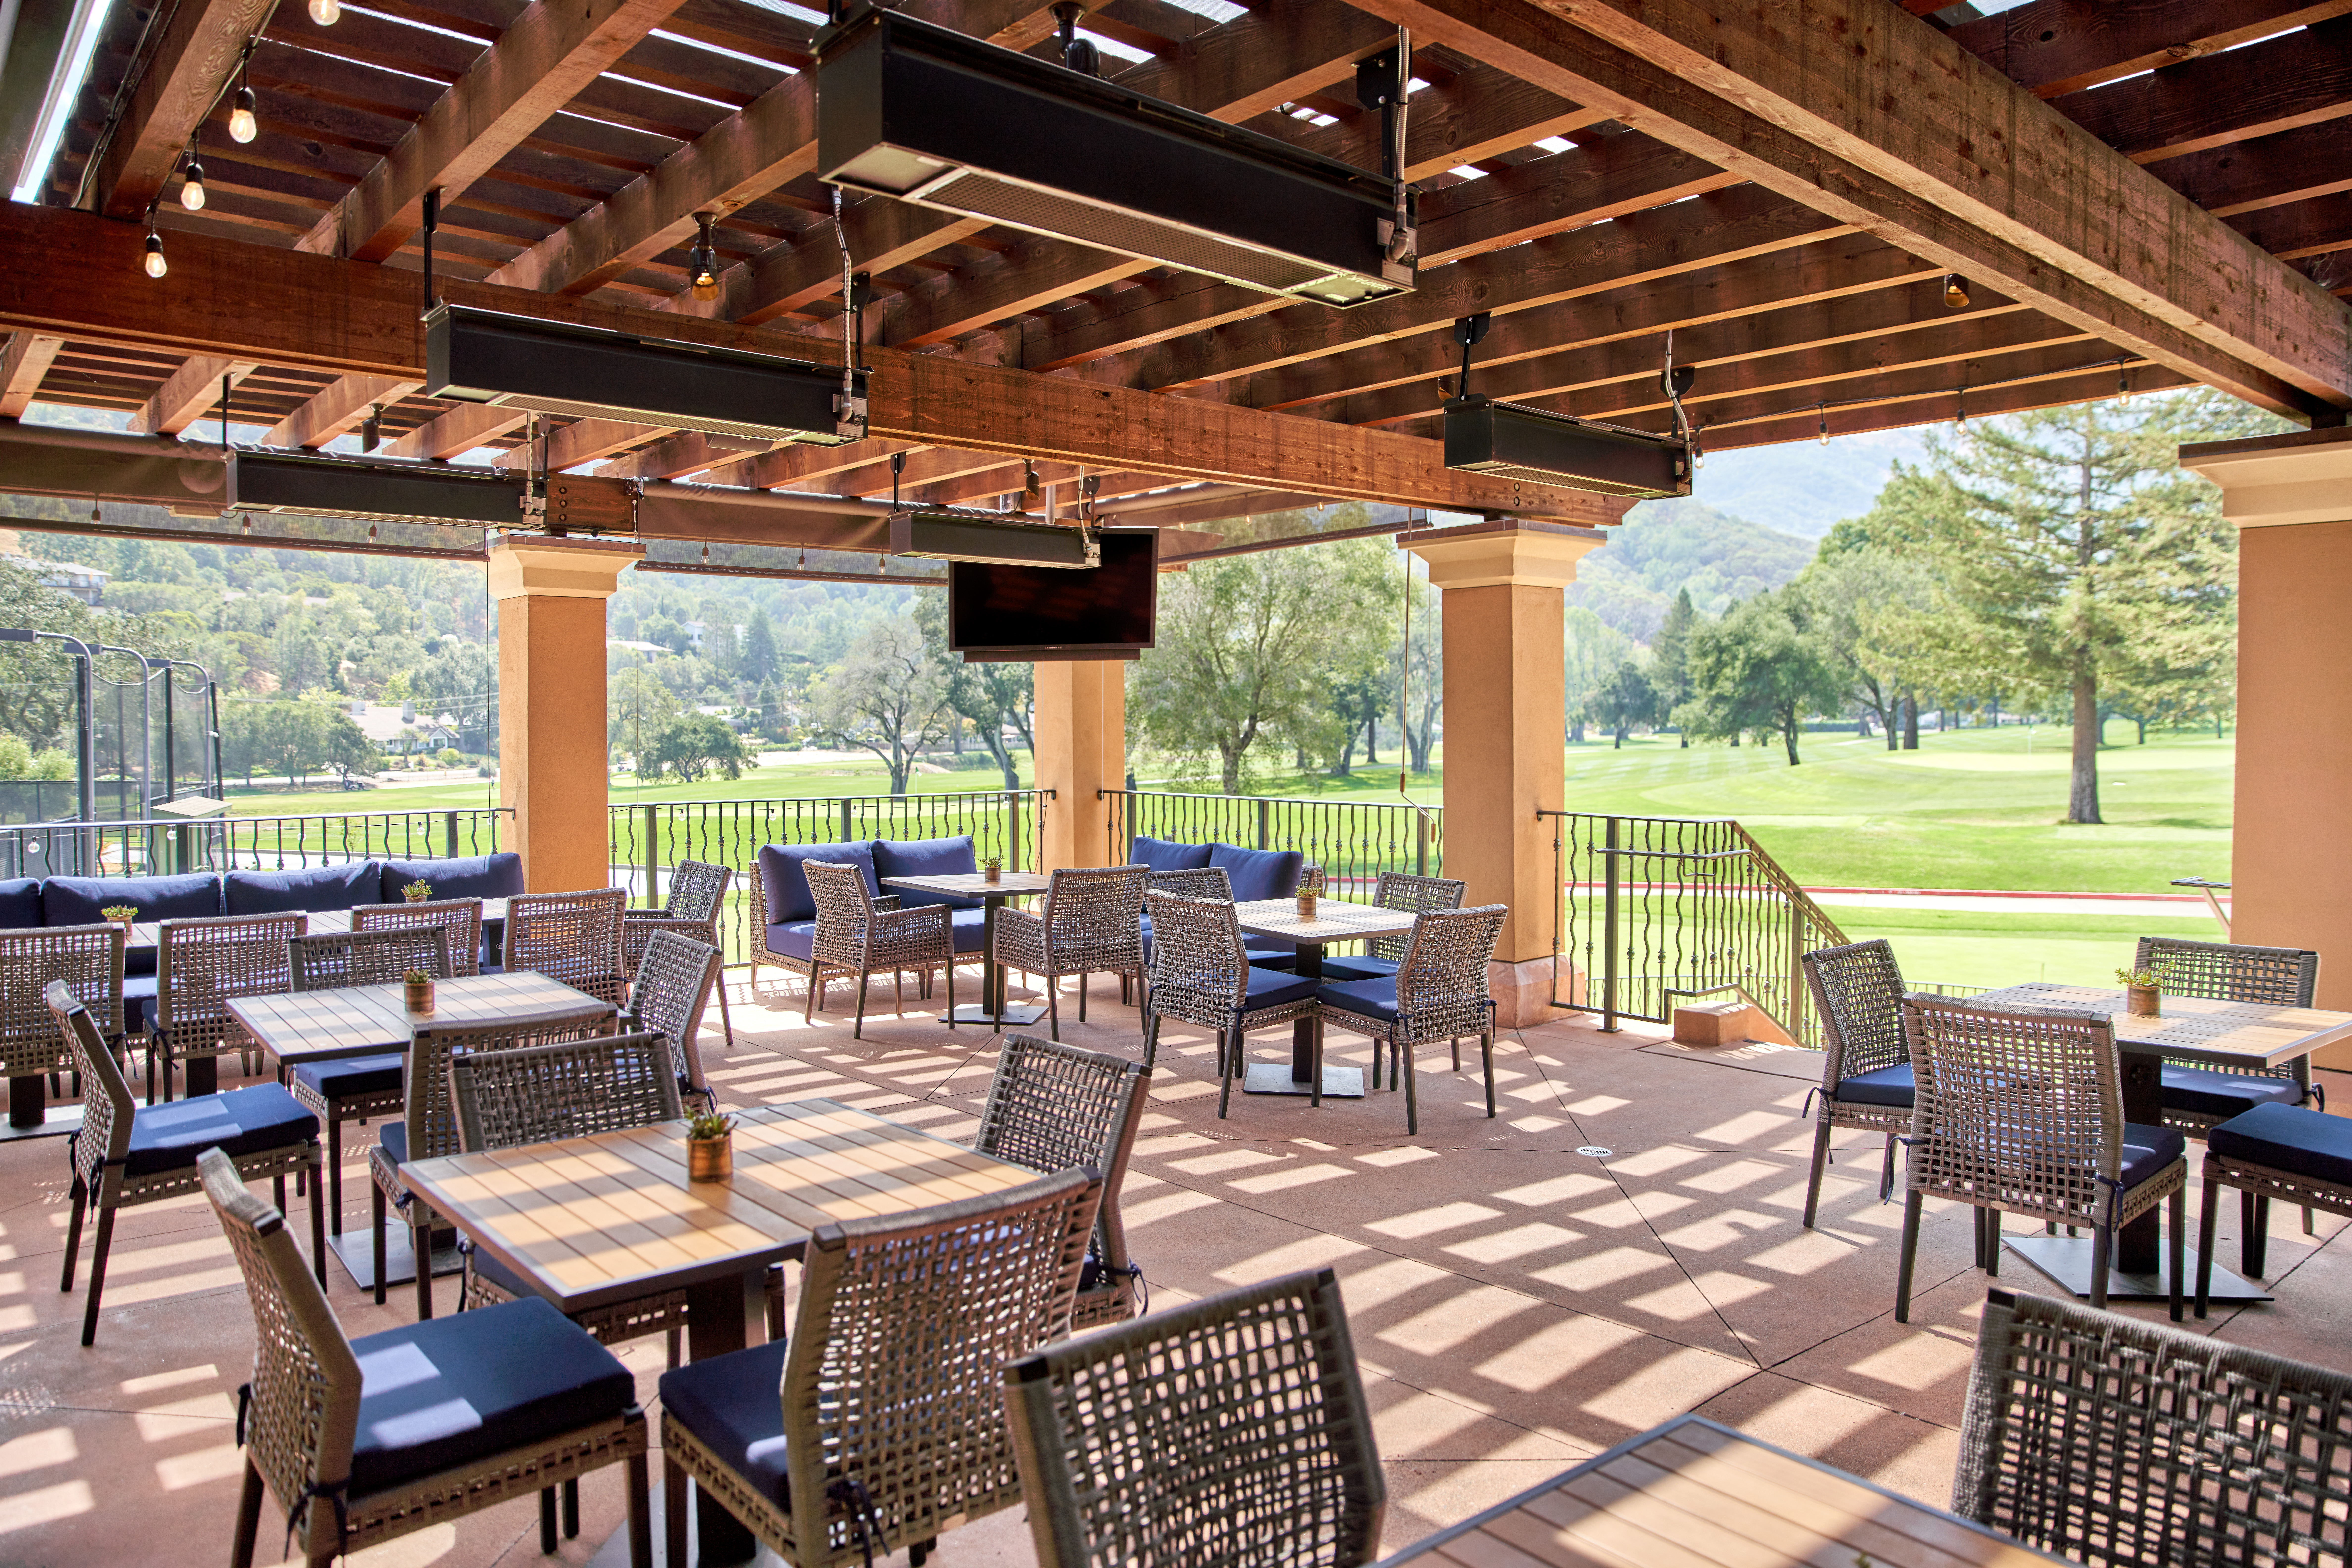 Upscale country club bar and restaurant exterior patio and furniture design, chairs and tables